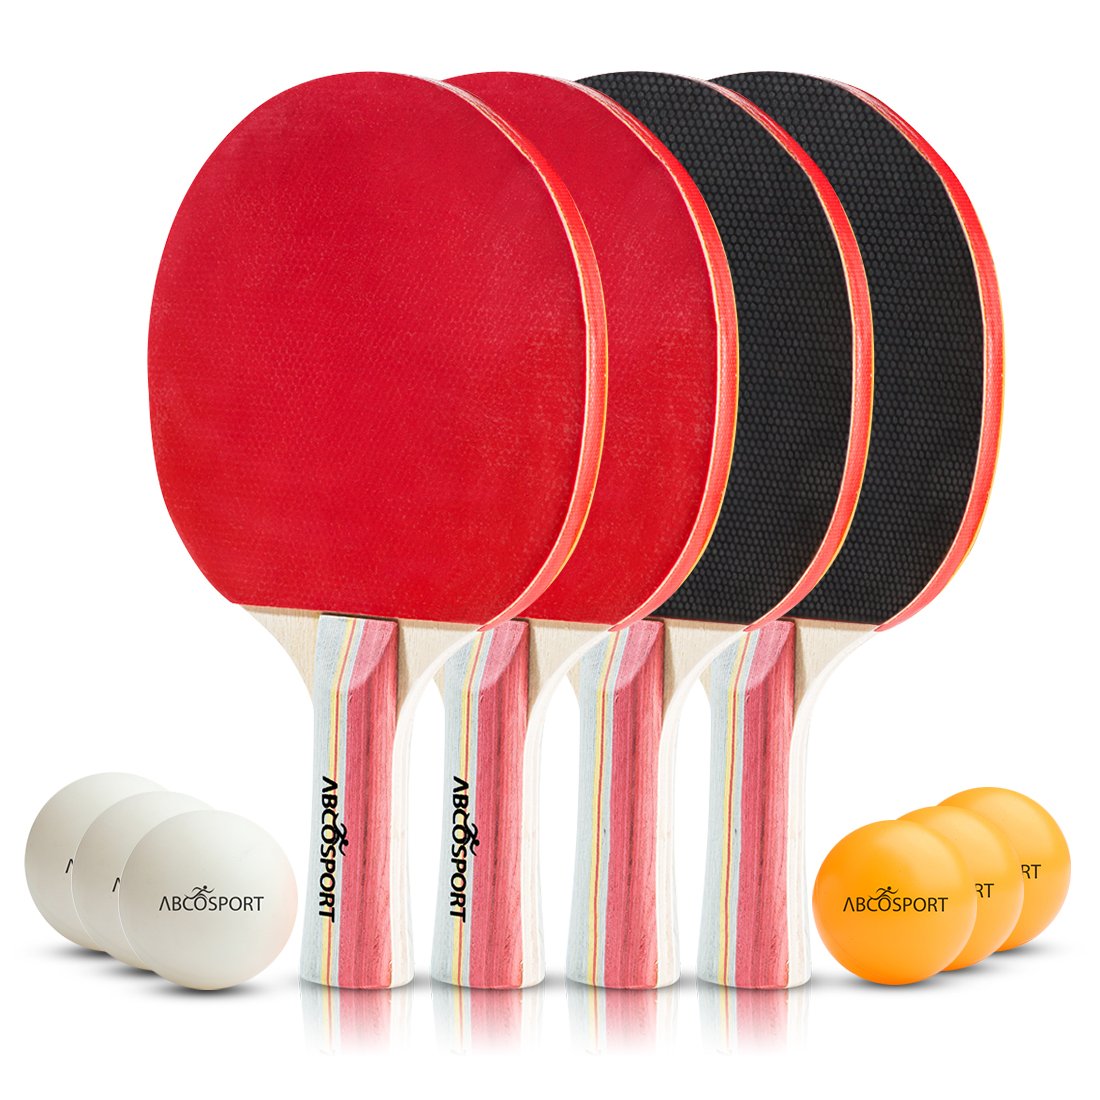 Table Tennis Ping Pong Set - Pack of 4 Premium Paddles/Rackets and 6 Table Tennis Balls - Soft Sponge Rubber - Ideal for Professional & Recreational Games - 2 or 4 Players - Perfect Set On The Go